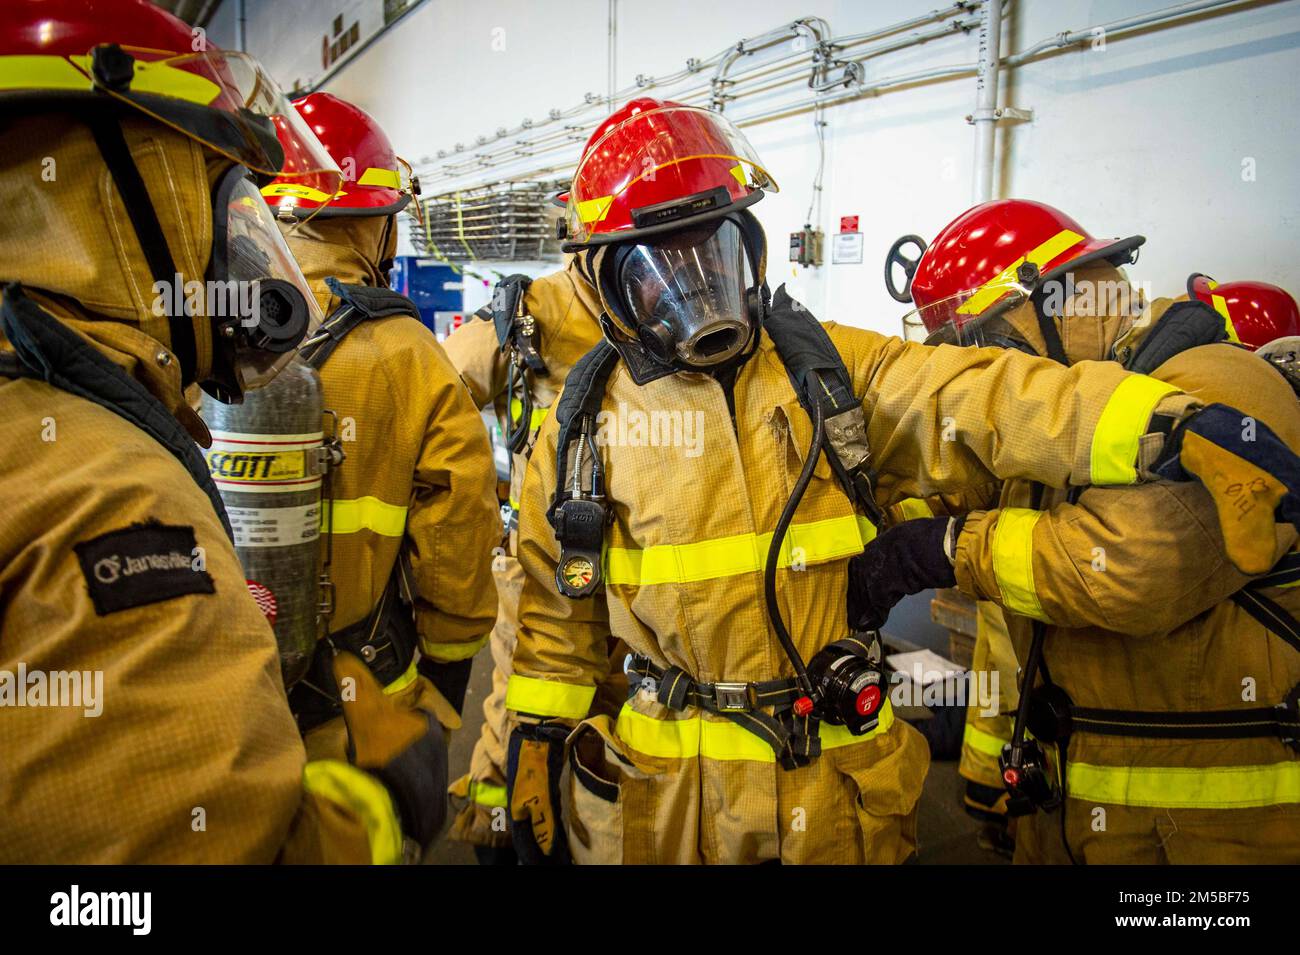 220221-N-SY758-1010 ATLANTIC OCEAN (Feb. 21, 2022) Sailors assigned to USS George H.W. Bush (CVN 77) don firefighting gear during a damage control drill for Tailored Ship’s Training Availability/Final Evaluation Problem (TSTA/FEP), Feb. 21, 2022. TSTA/FEP is a multi-phase training evolution designed to give the crew a solid foundation of unit-level operating proficiency and to enhance the ship’s ability to self-train. George H.W. Bush provides the national command authority flexible, tailorable war fighting capability through the carrier strike group that maintains maritime stability and secur Stock Photo